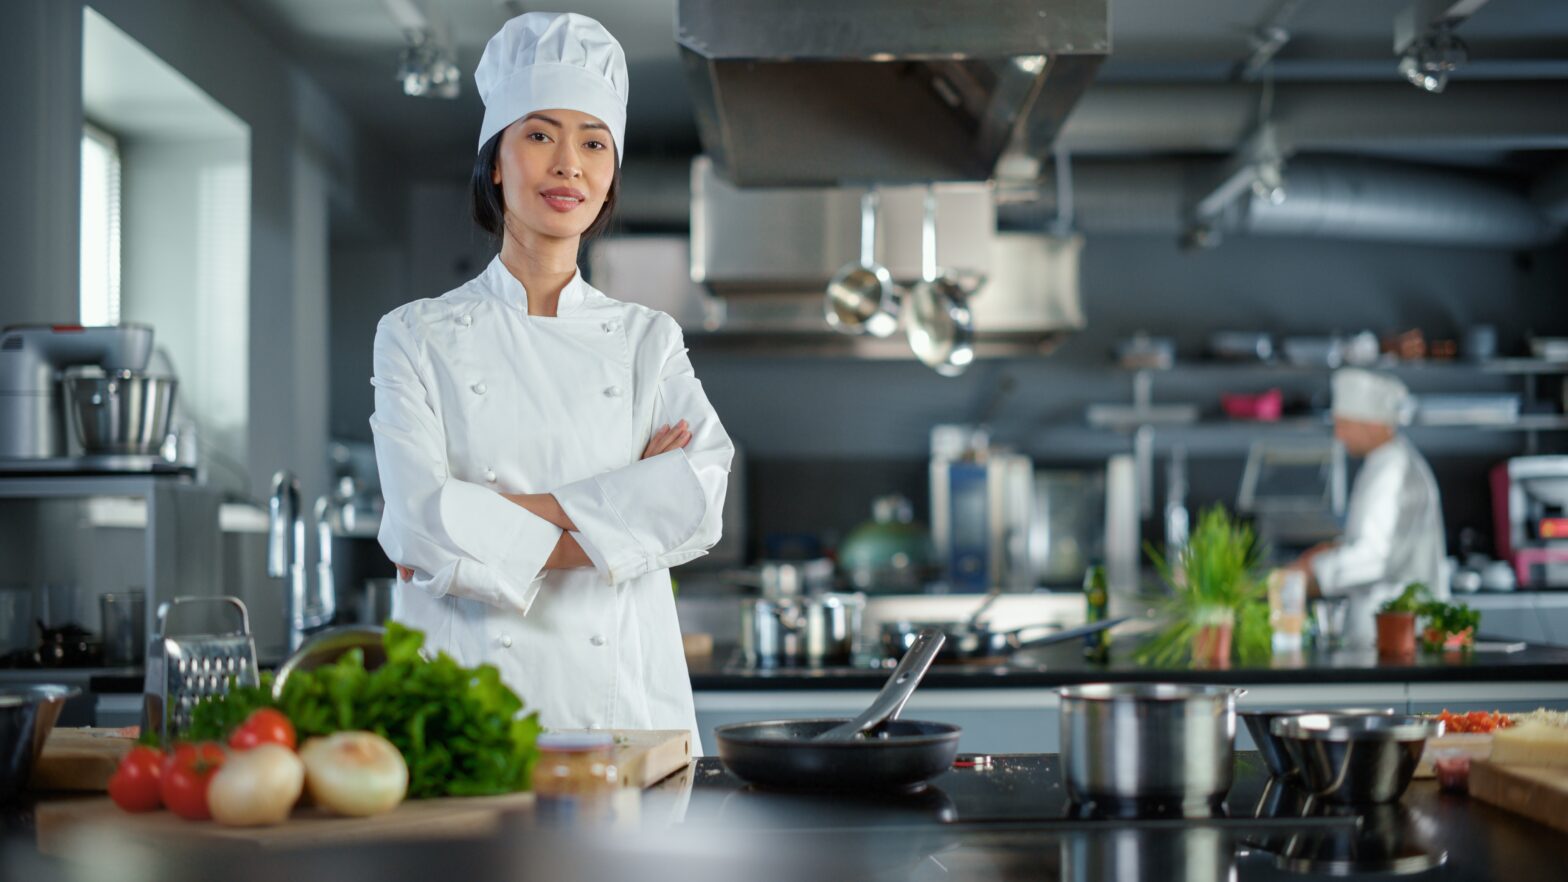 Modern,Kitchen,Restaurant:,Portrait,Of,Asian,Female,Chef,,Crossing,Arms